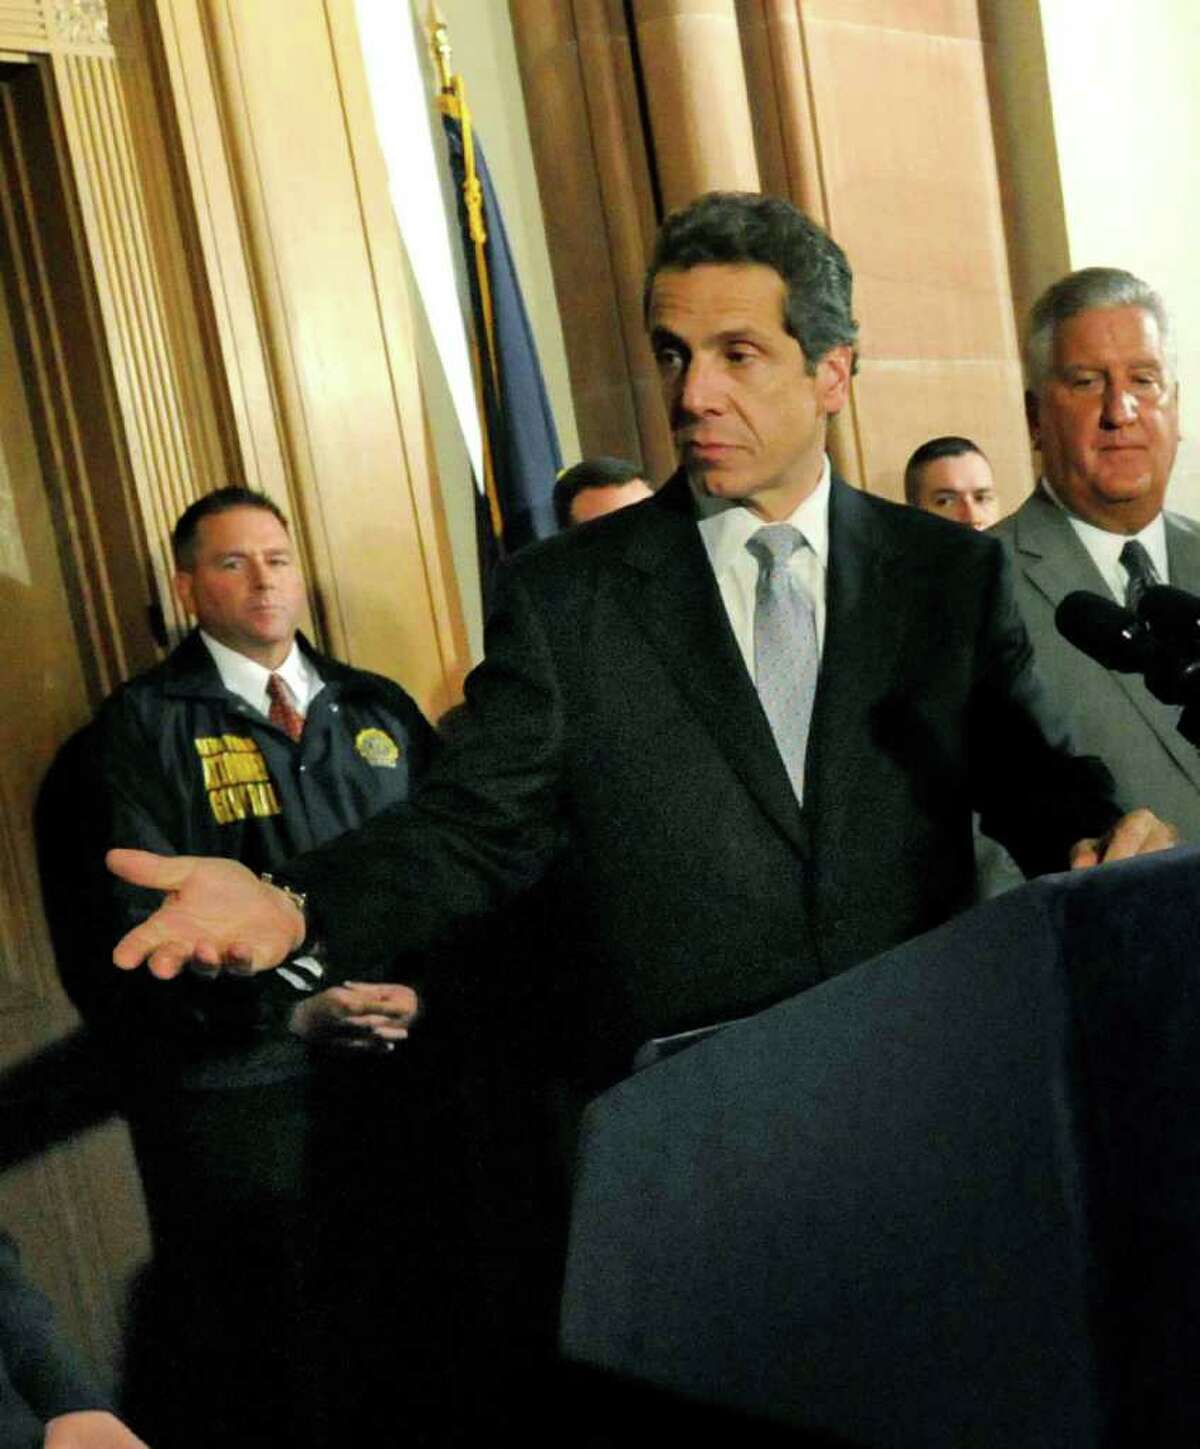 New York State Attorney General and Democratic candidate for governor Andrew Coumo talks during a news conference to announce the details of operation "Blood Trail" at the Capitol in Albany on Wednesday afternoon. (Michael P. Farrell / Times Union)